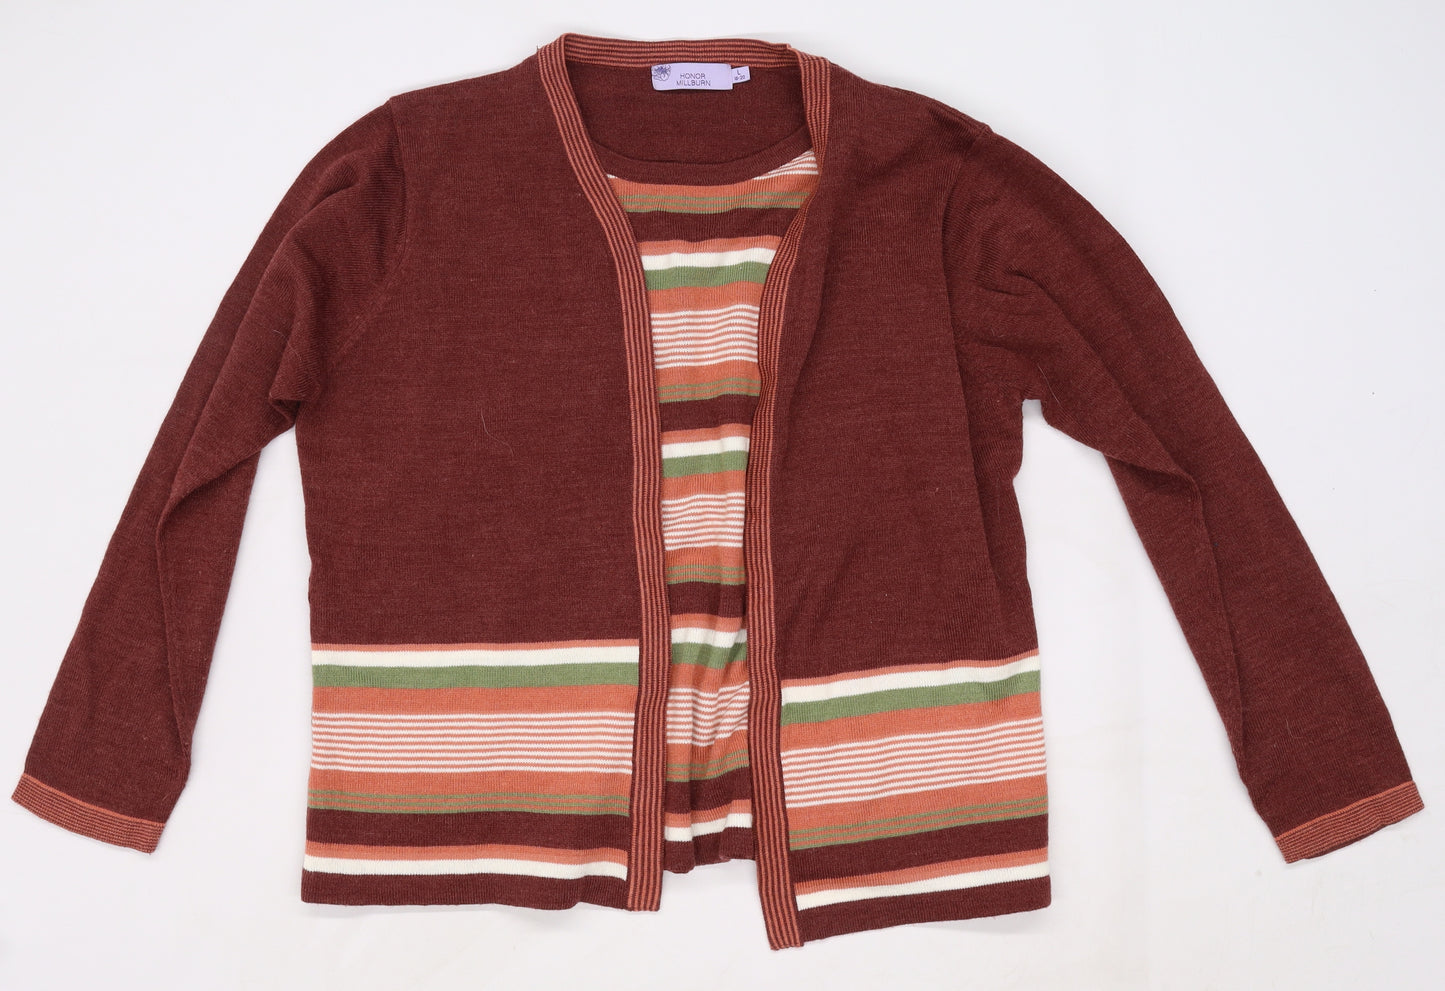 Honour Womens Red Striped  Cardigan Jumper Size 18